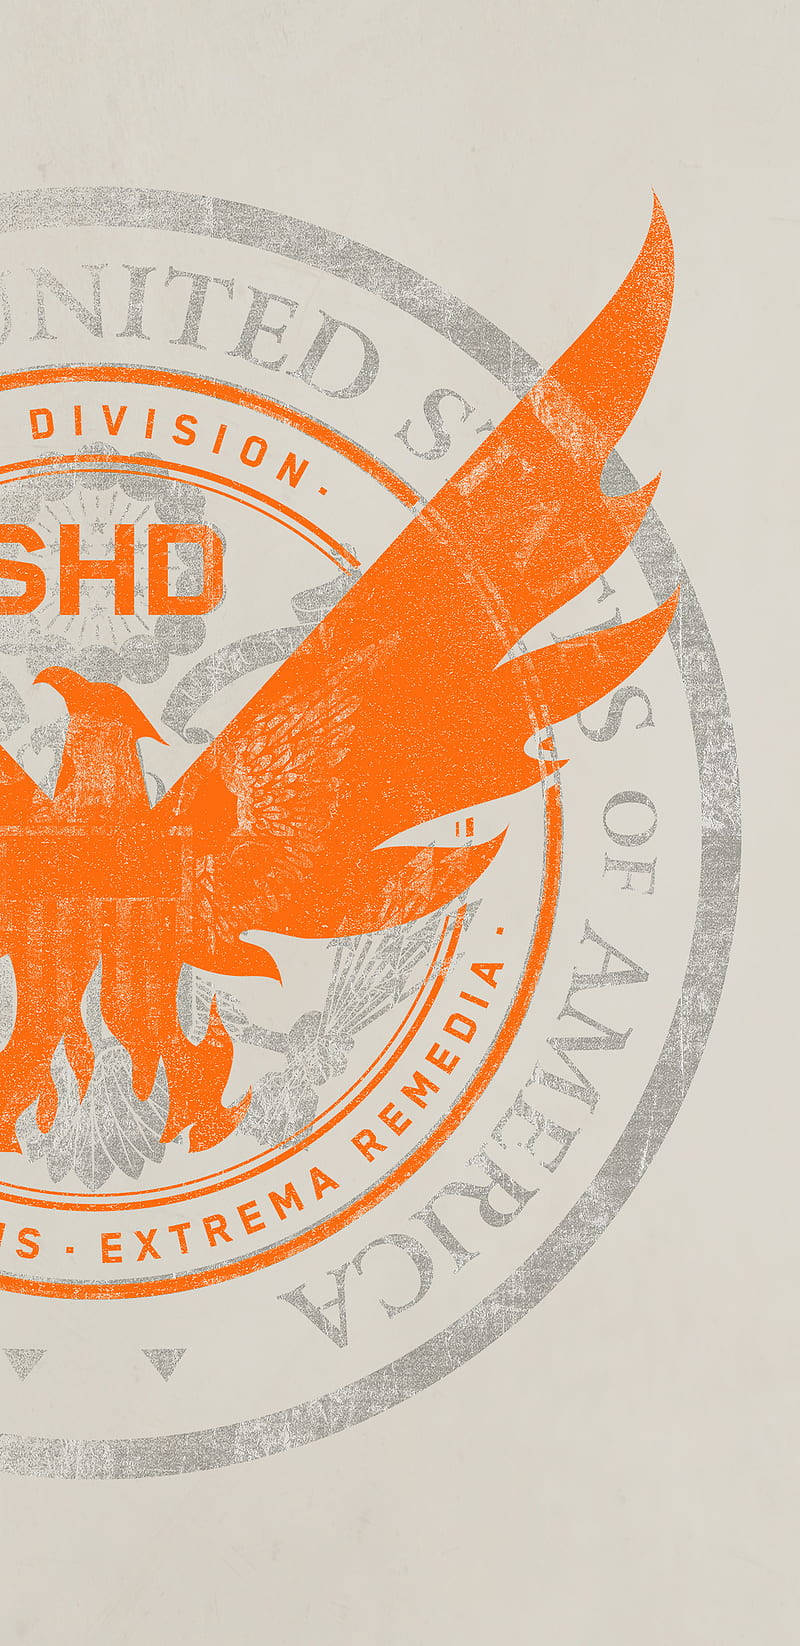 High-Tech Surveillance in the palm of your hand with The Division Phone Wallpaper